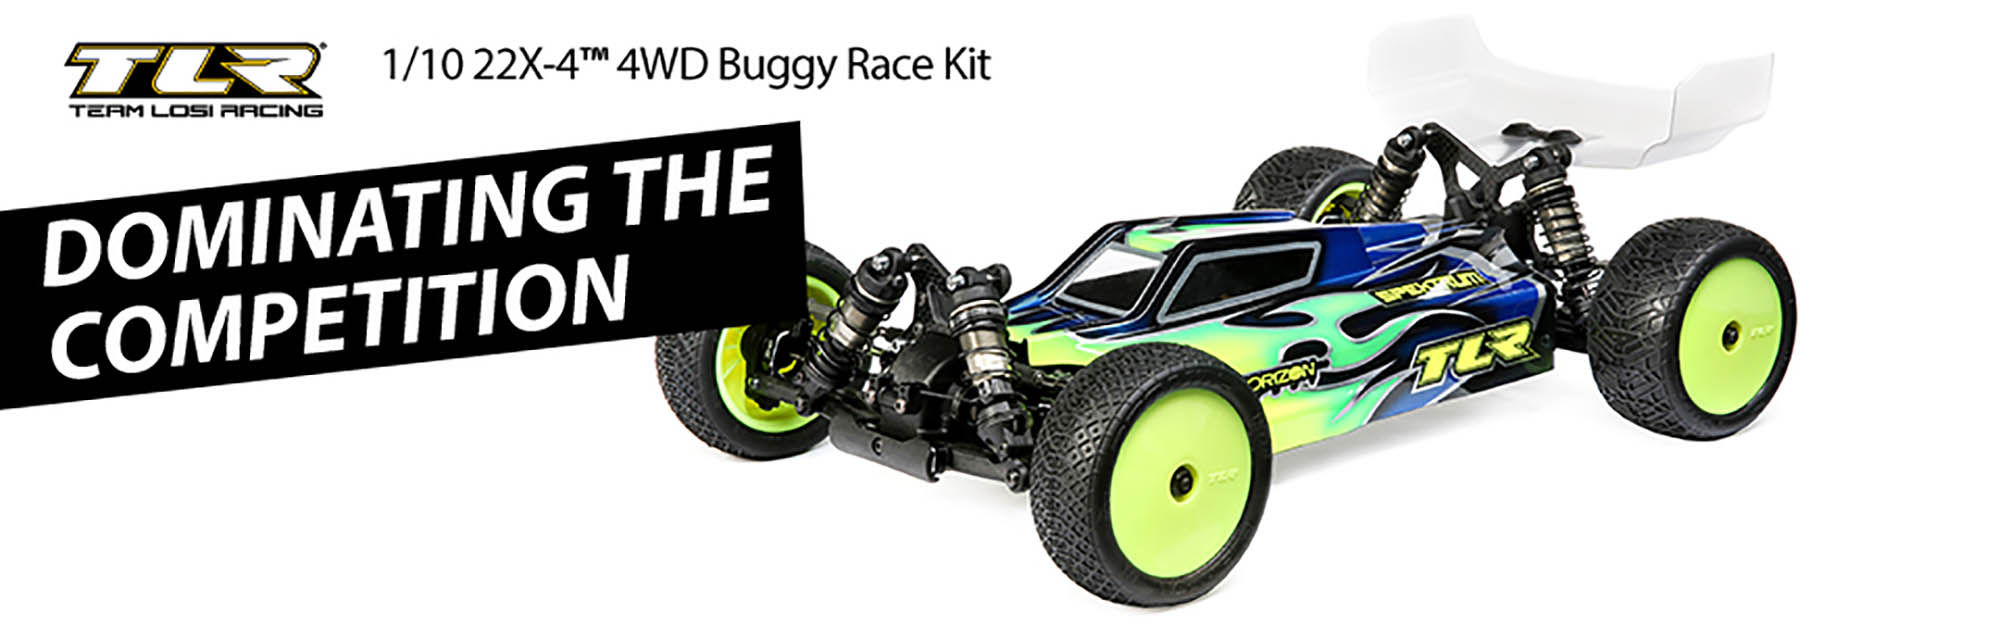 TLR<sup>®</sup> 1/10 22X-4 Race Buggy Kit